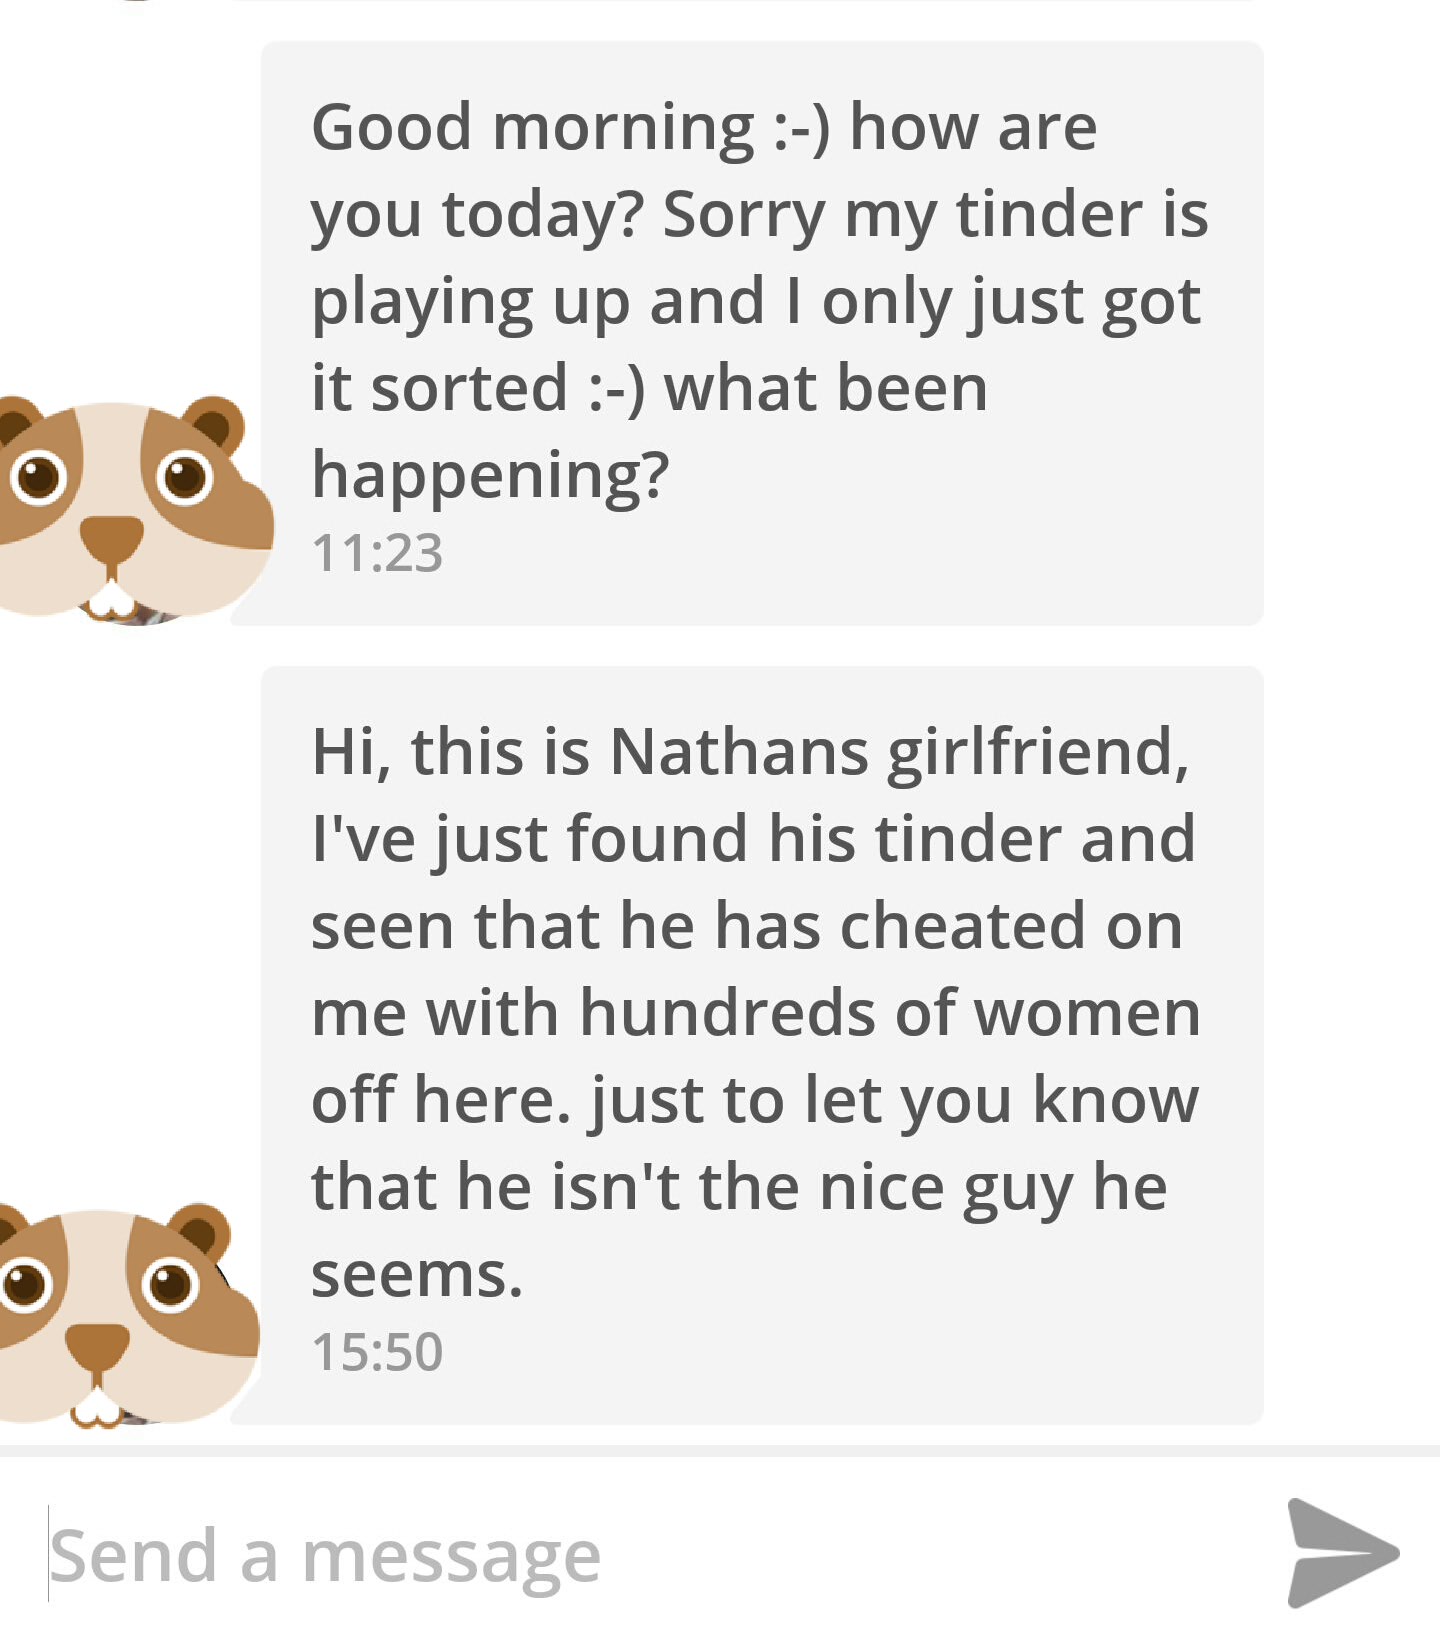 human behavior - Good morning how are you today? Sorry my tinder is playing up and I only just got it sorted what been happening? Hi, this is Nathans girlfriend, I've just found his tinder and seen that he has cheated on me with hundreds of women off here